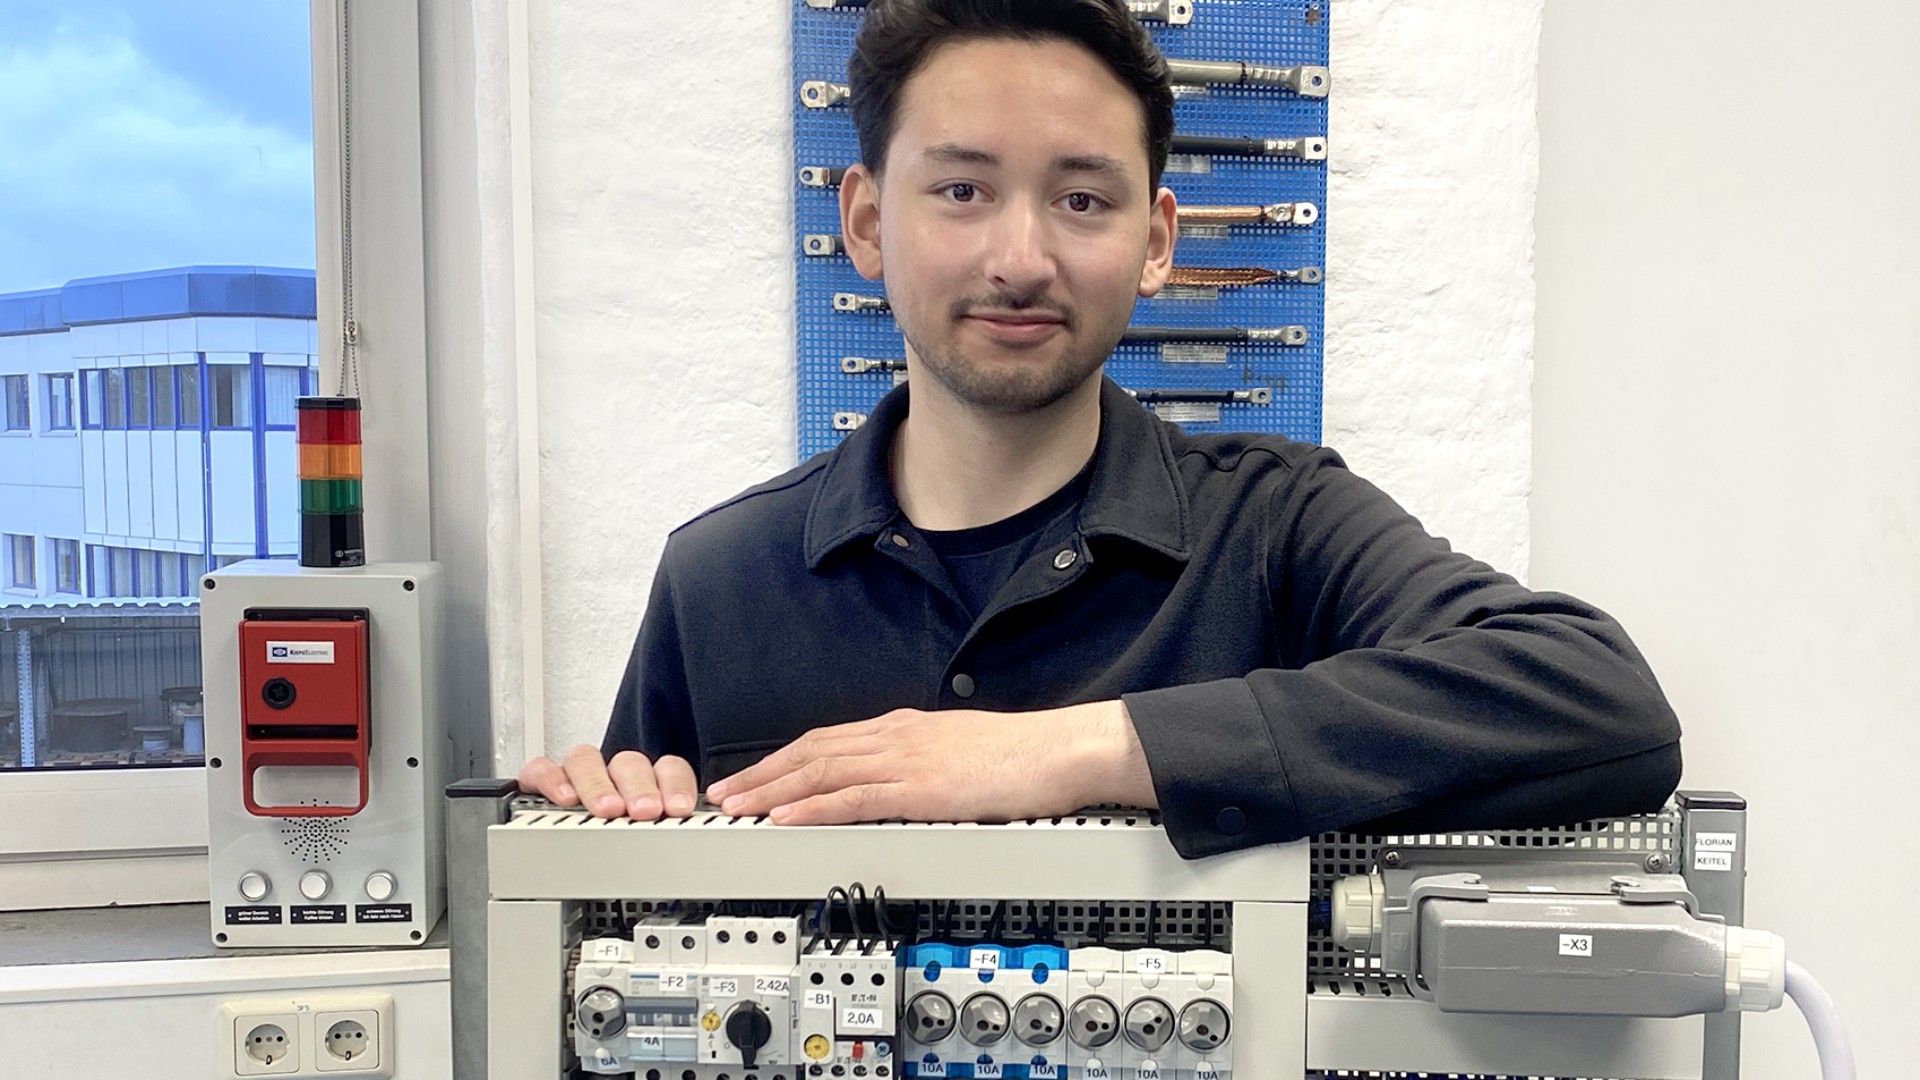 Apprentice Mike Ahrweiler from Kiepe Electric stands in front of an electronic construction kit in Kiepe's training workshop.